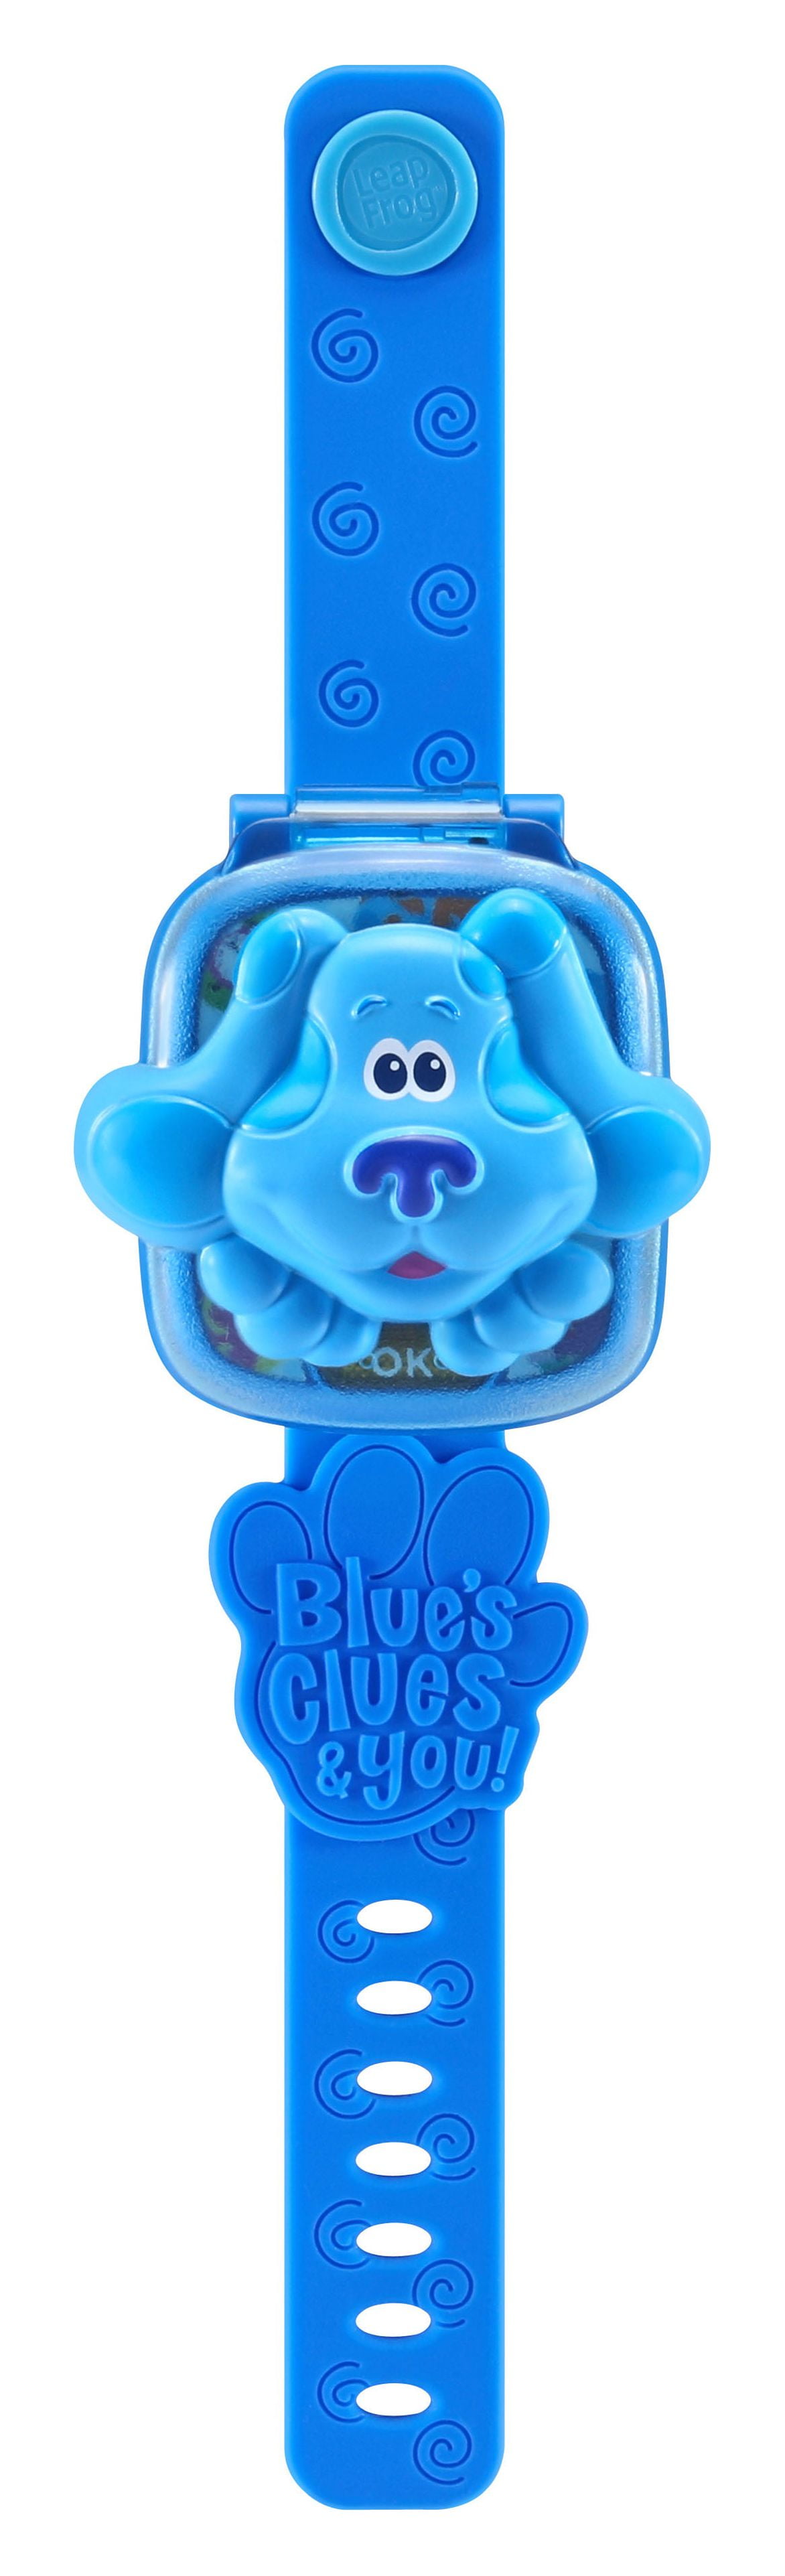 LeapFrog Blue's Clues & You! Blue Learning Watch for